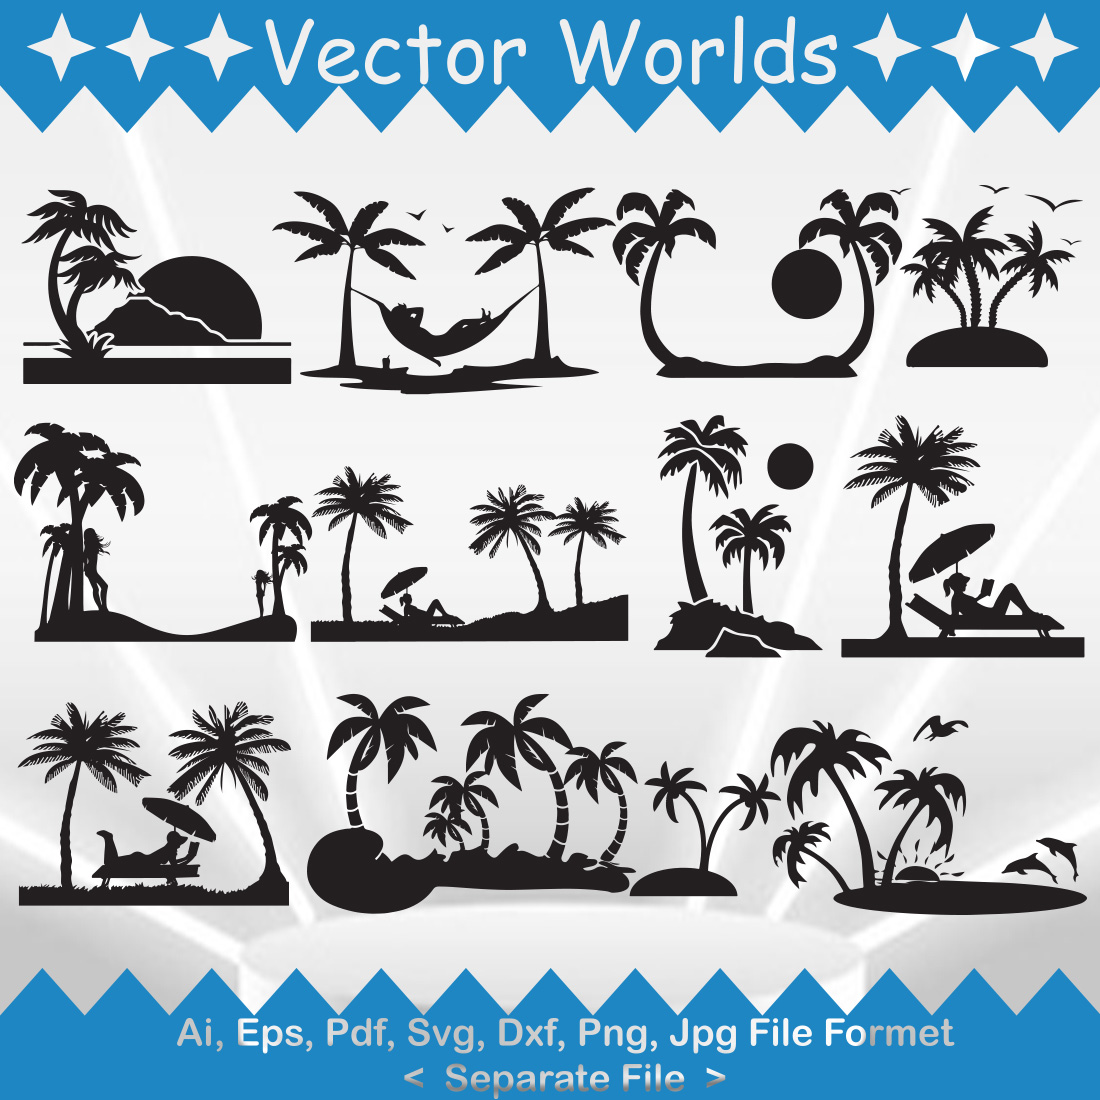 Pack of vector elegant beach stencil images in black color.